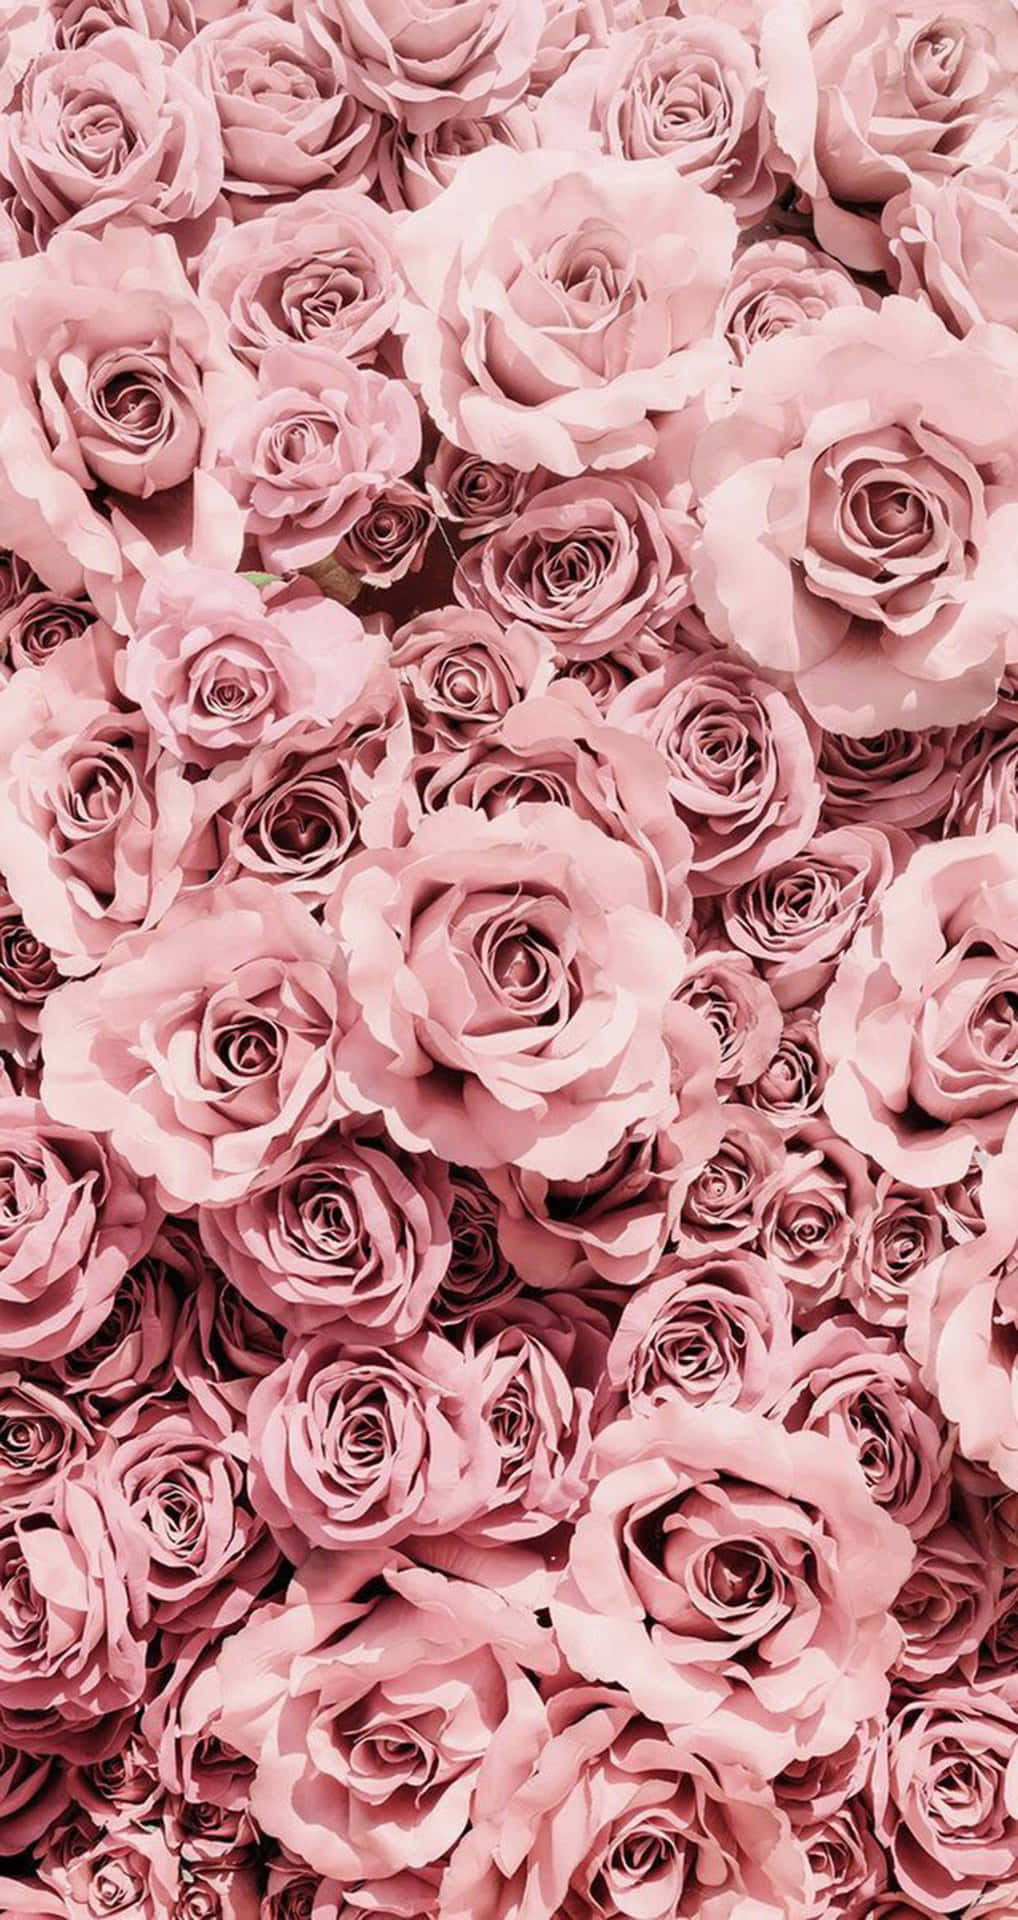 Pink Roses Are Arranged In A Pile Wallpaper